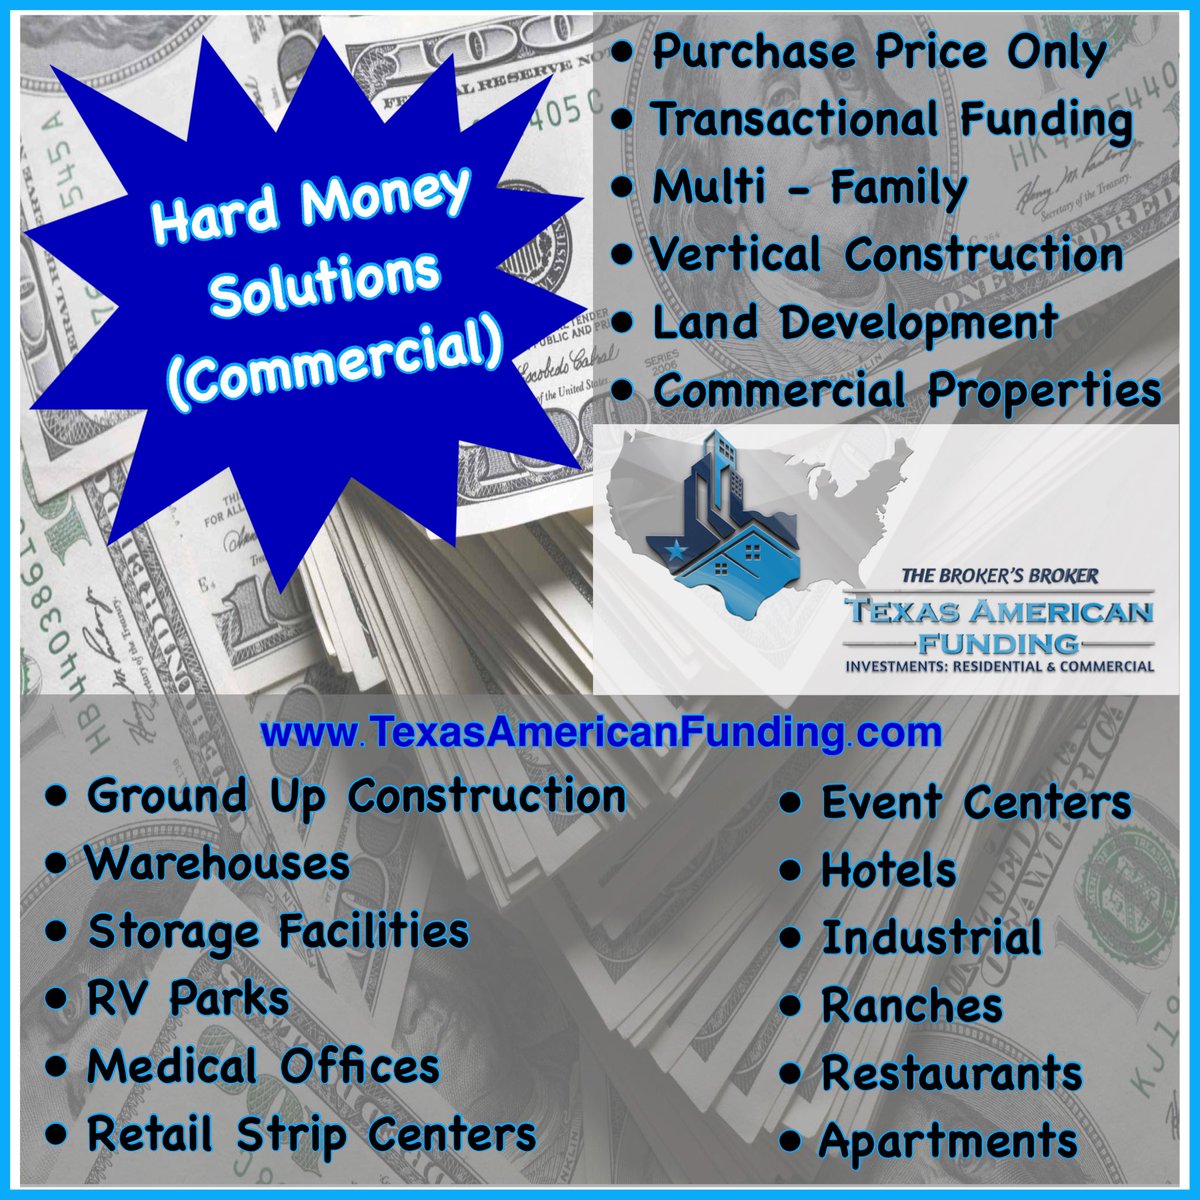 Appointments:
bit.ly/TAFcalendarInv…

#CommercialMortgages #RealEstateInvesting #MultiFamily #VerticalConstruction #LandDevelopment #CommercialProperties #Warehouses #StorageFacilities #RVParks #MedicalOffices #RetailStripCenters #Hotels #Industrial #Ranches #Restaurants